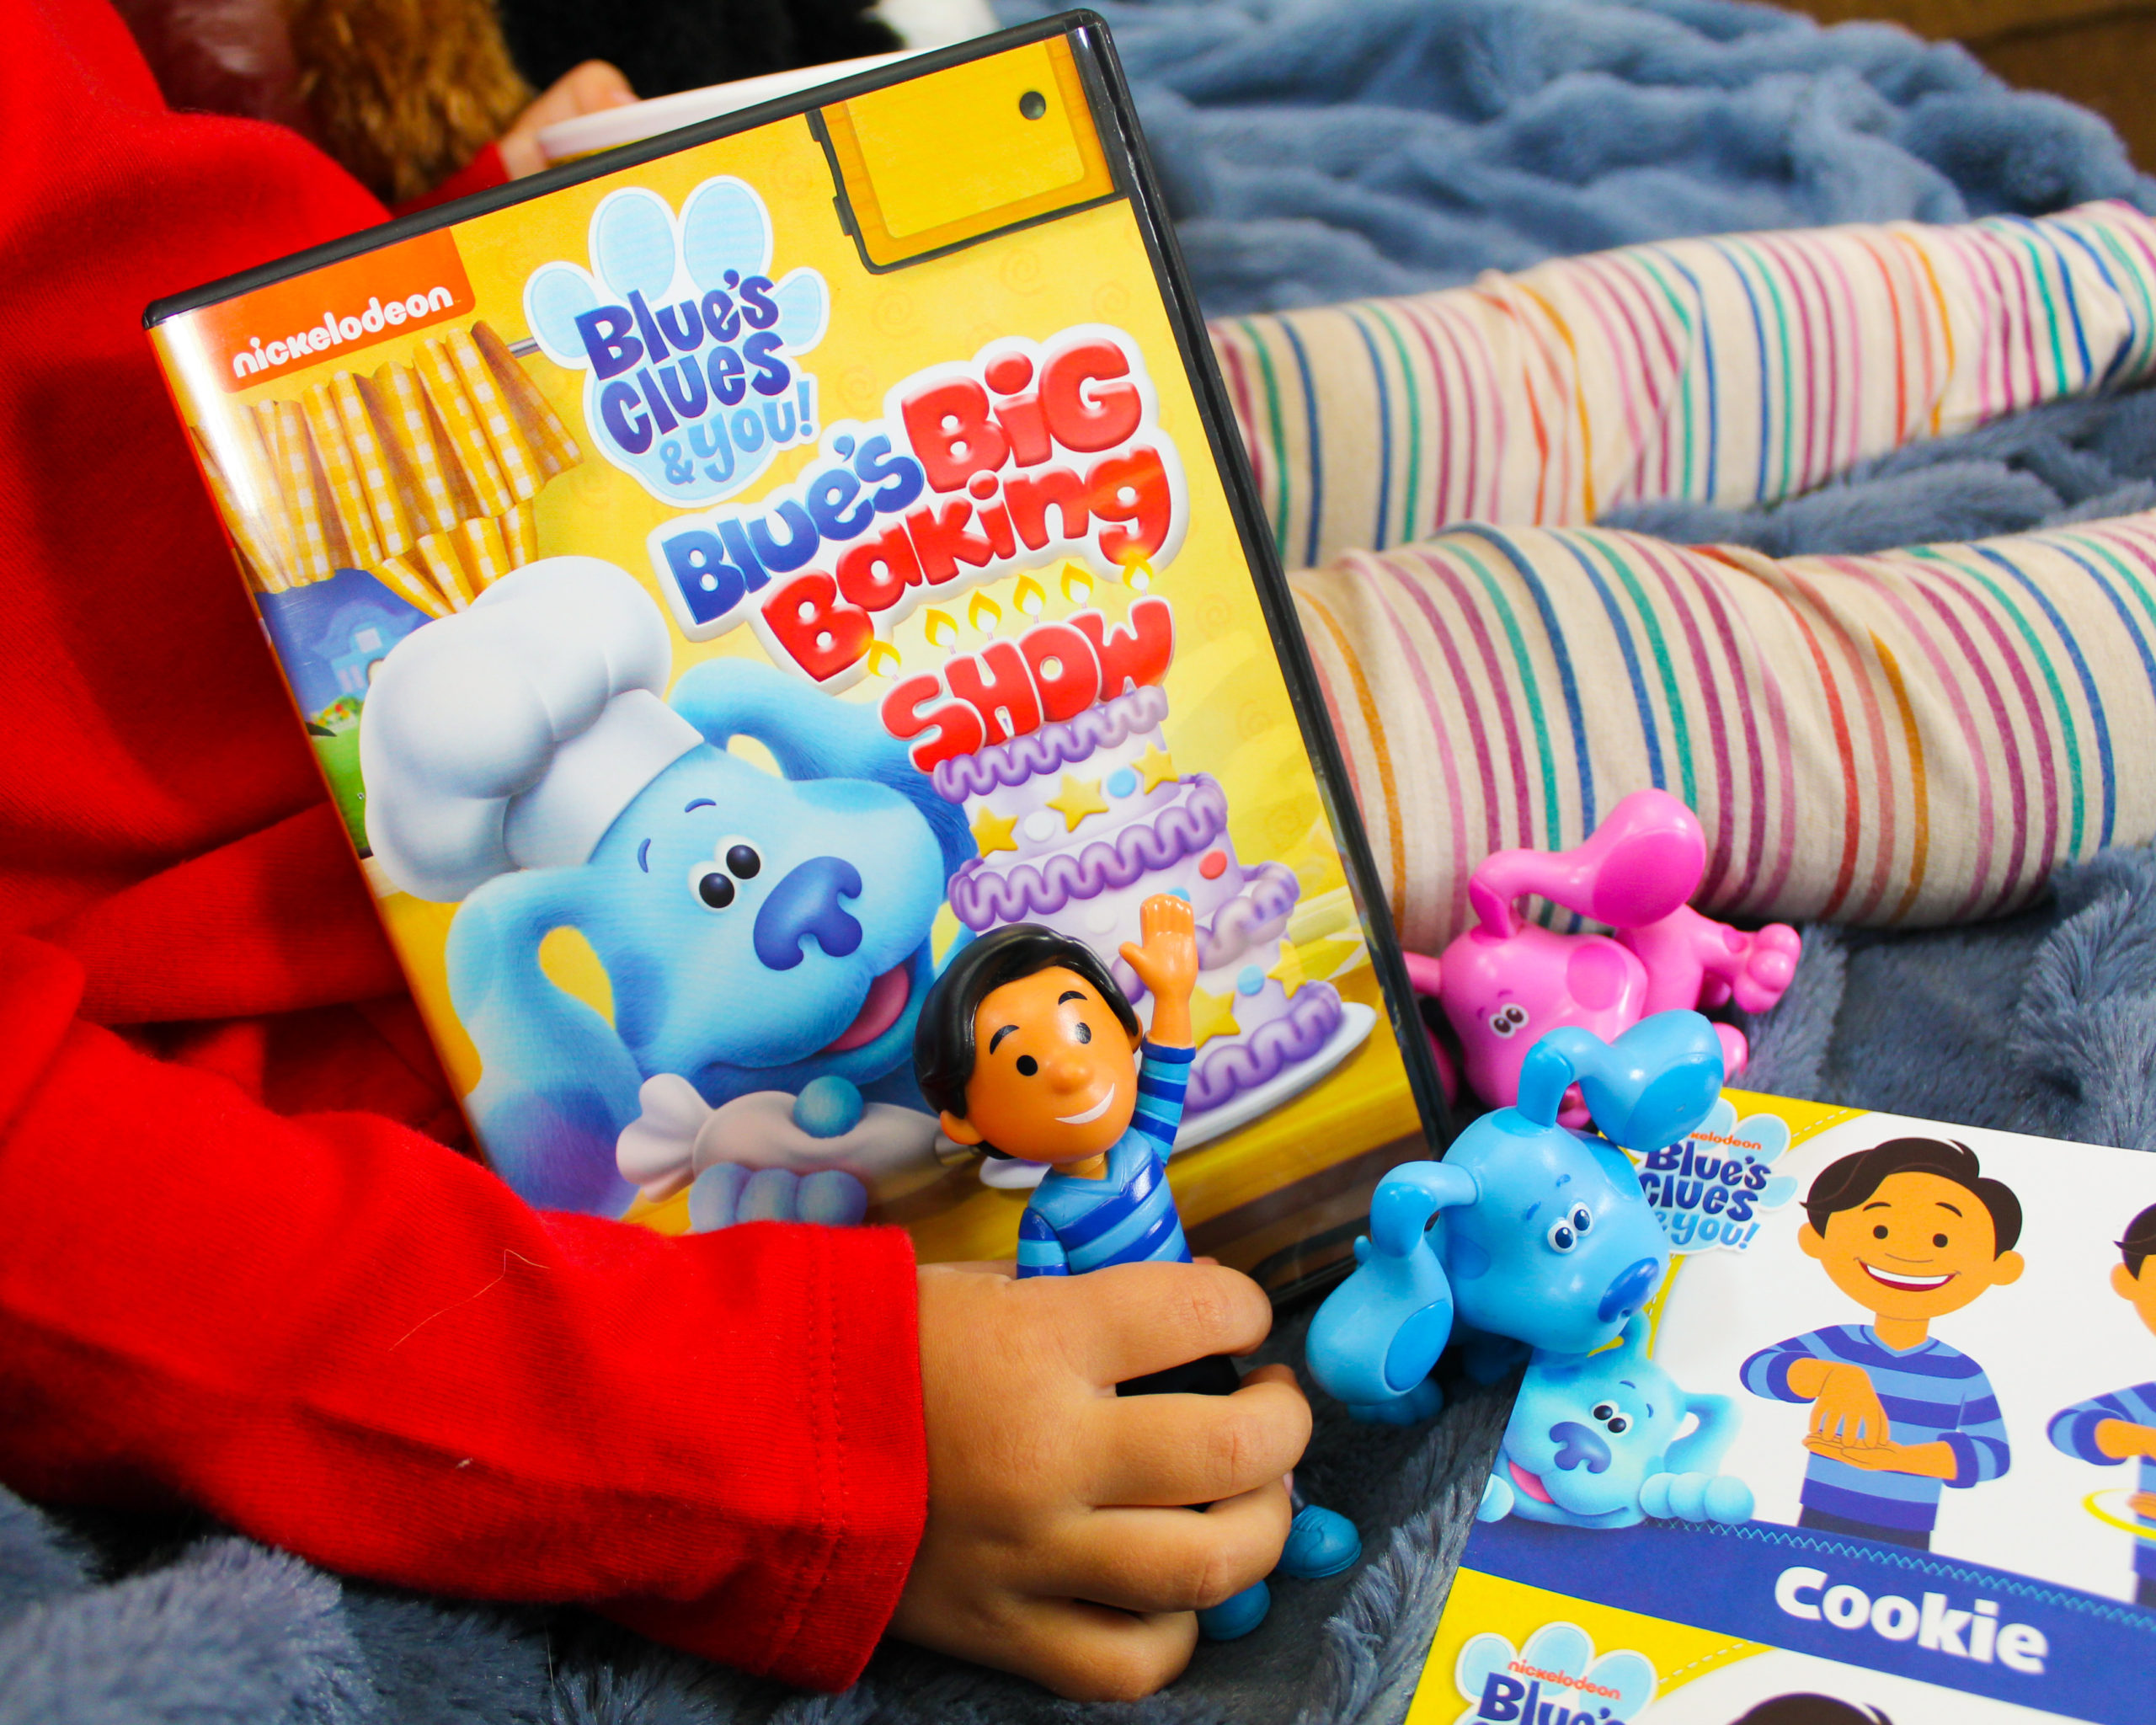 Blue's Clues & You! Blue's Big Baking Show now on DVD